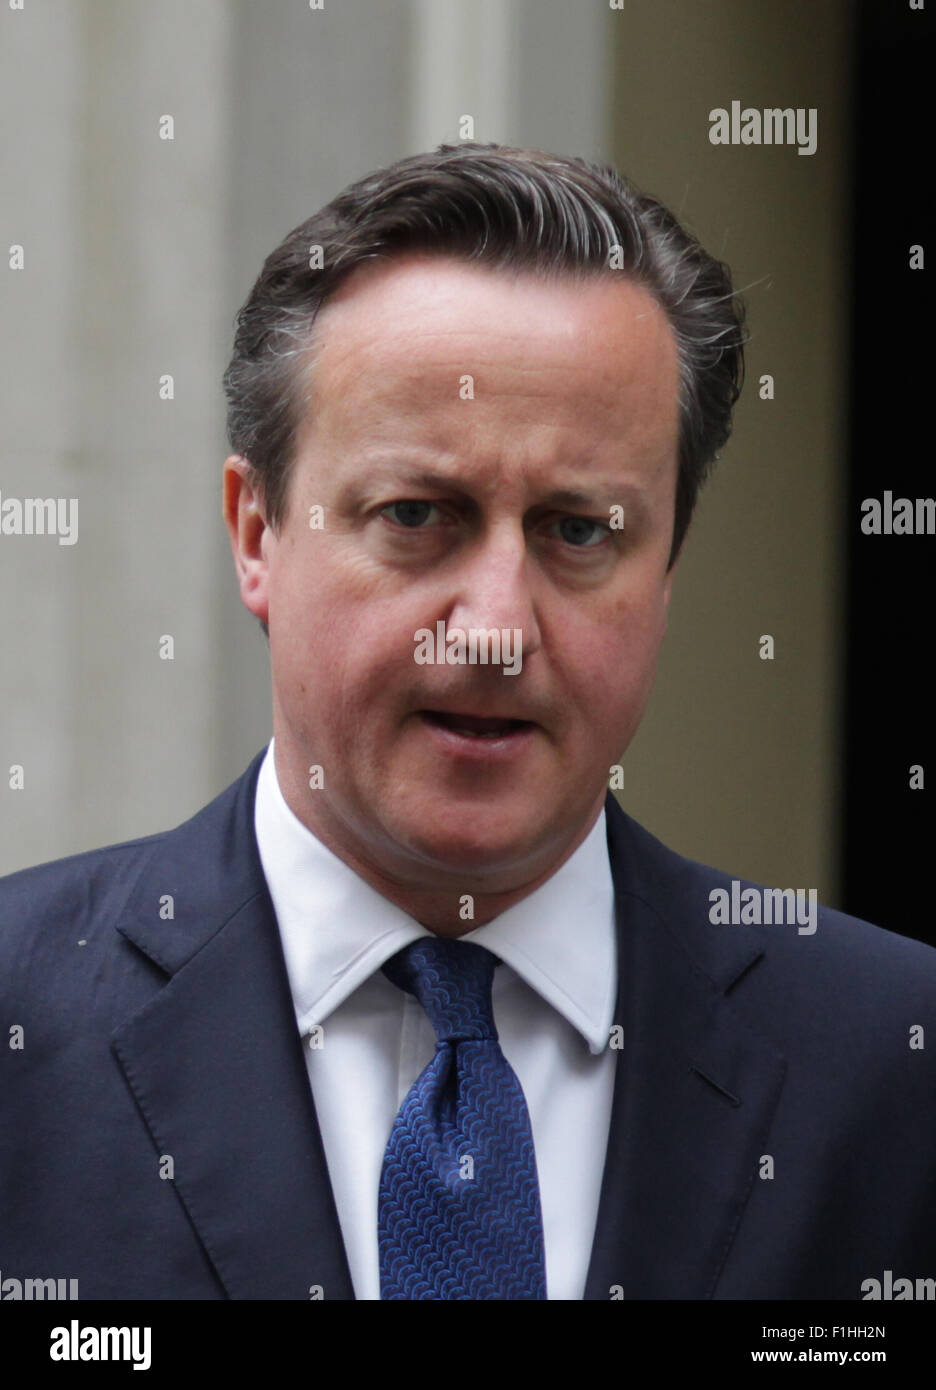 London, UK, 14th July 2015: David Cameron British Prime Minister seen leaving Downing Street in London Stock Photo